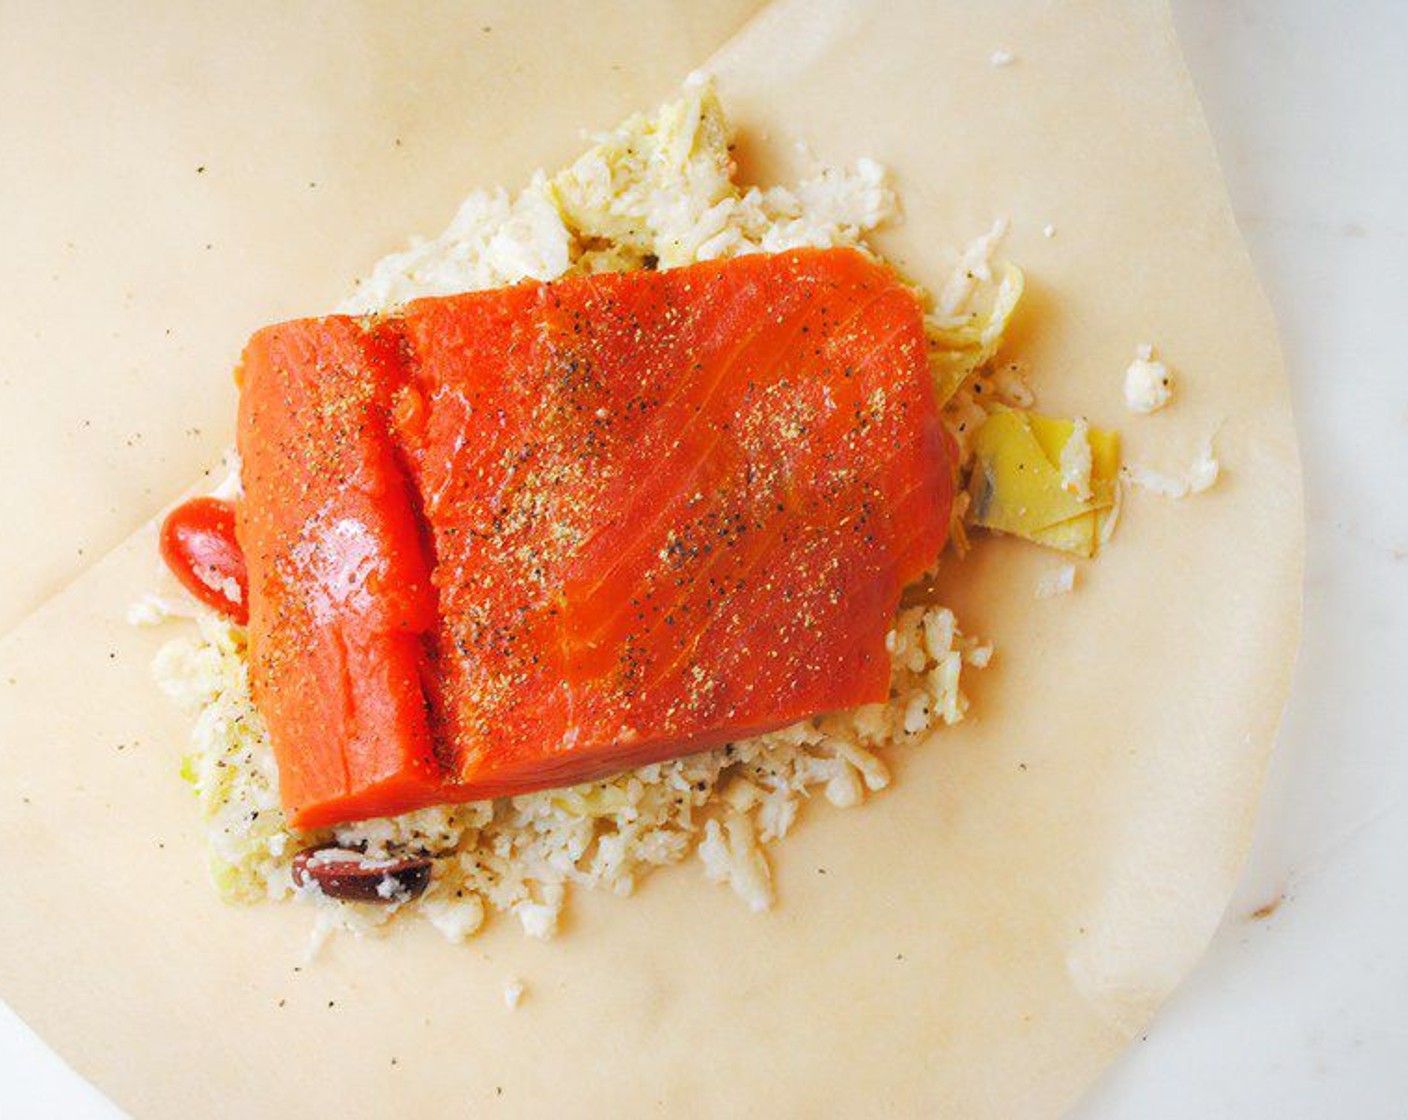 step 4 Put 1 cup of the cauliflower rice mixture into the center of one side of the heart. Place one of the salmon fillets on top and drizzle the Skinless Salmon Fillets (4) with a little Olive Oil (to taste). I like to sprinkle additional Greek Seasoning on top.